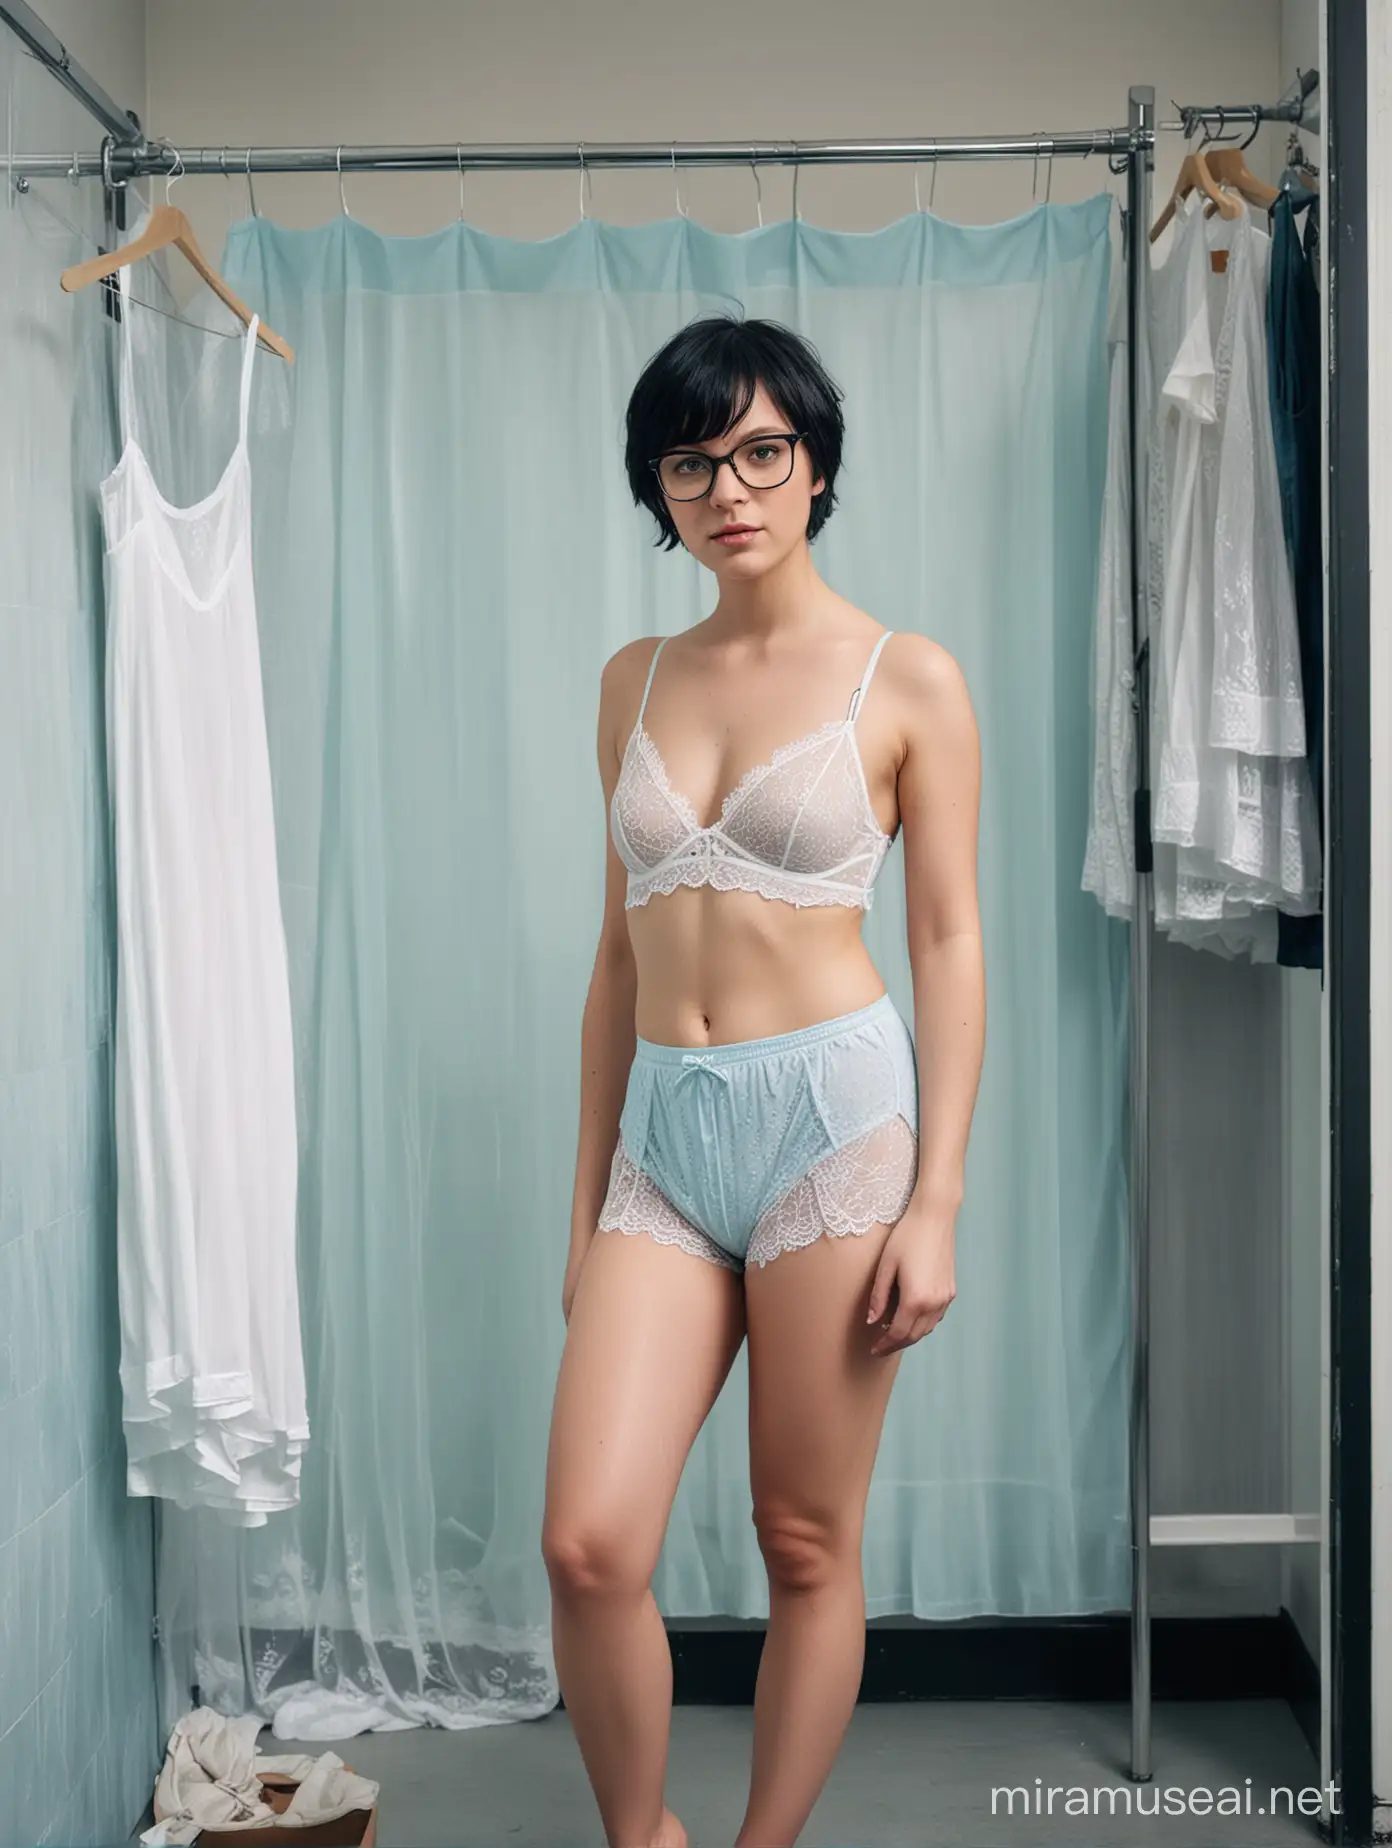 Woman Trying On Lingerie in Dimly Lit Changing Room